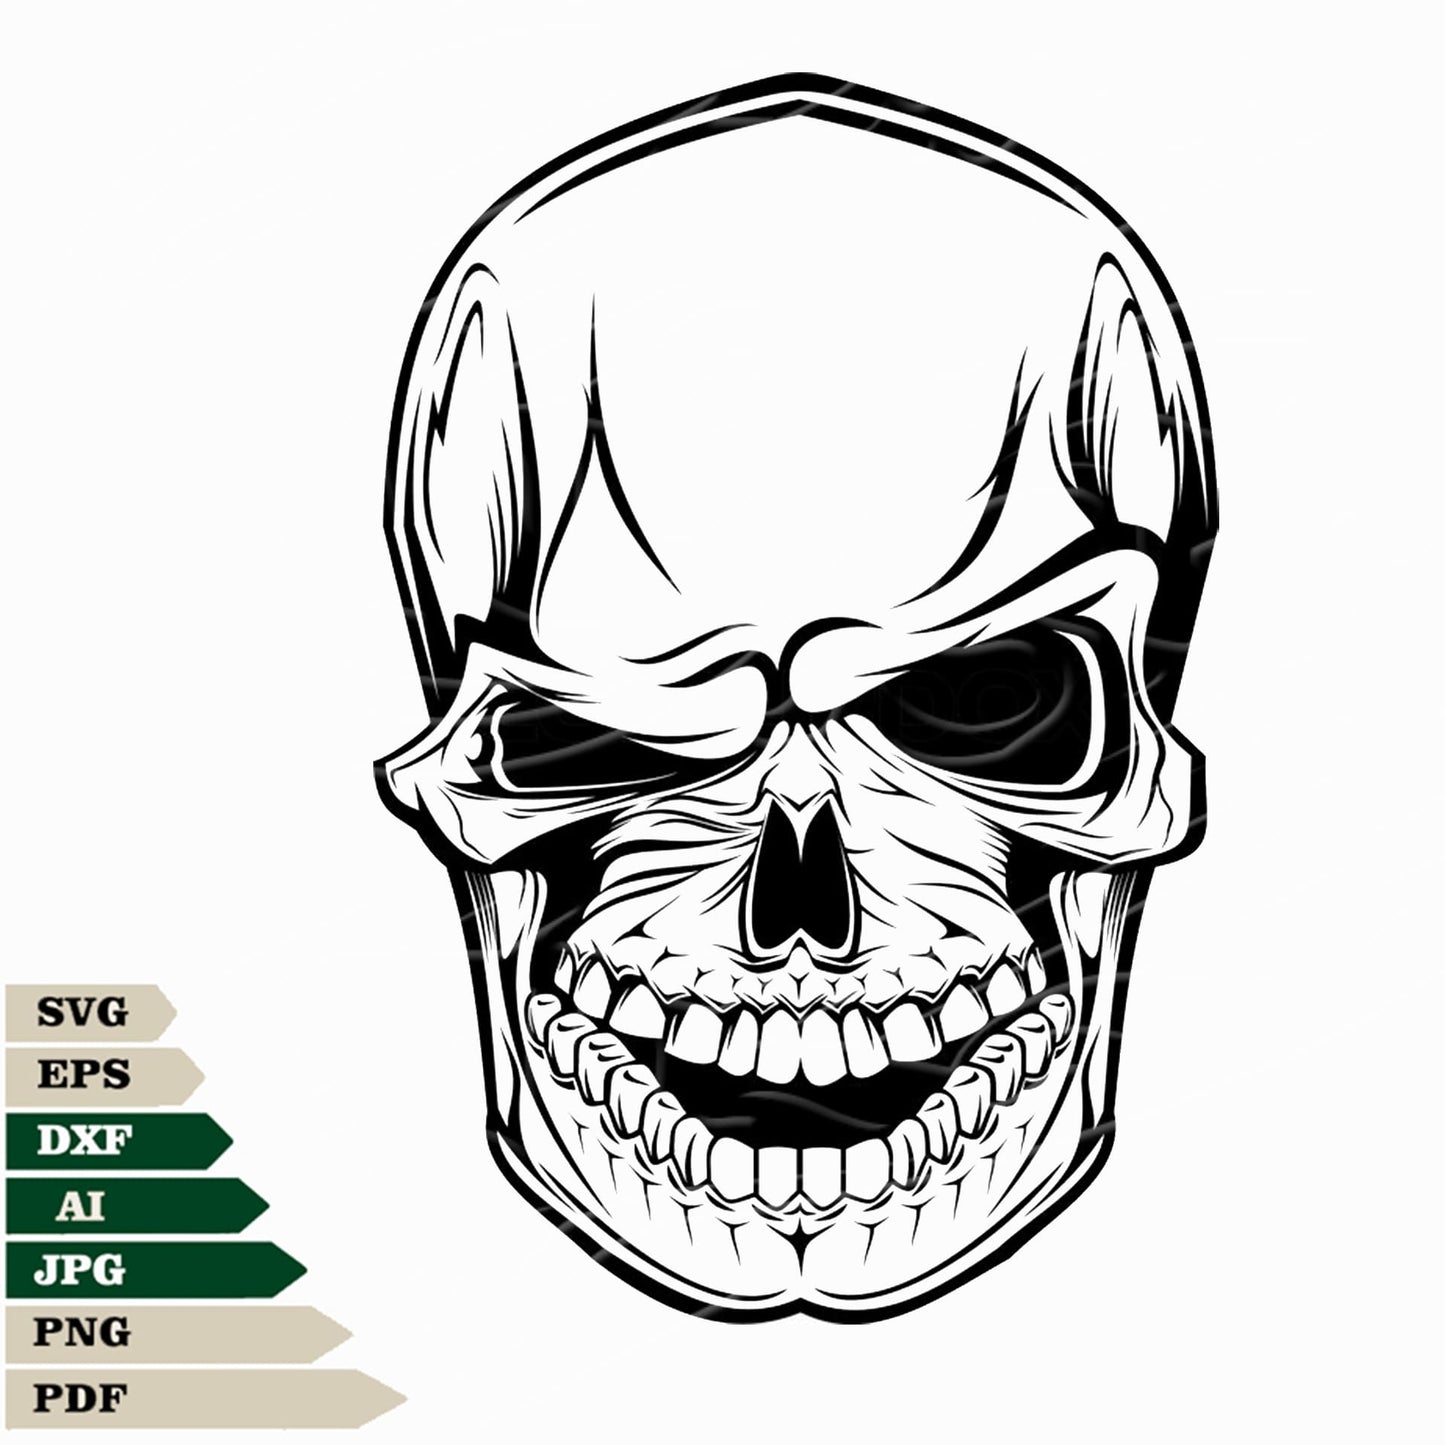 This Skull Svg File is designed with precision to provide a Human Skull Svg Design for use with Smiling Skull Png, Skull Vector Graphics, Human Skull Svg For Tattoo, and Smiling Skull Svg For Cricut. Ideal for professional graphic editors and tattoo artists.